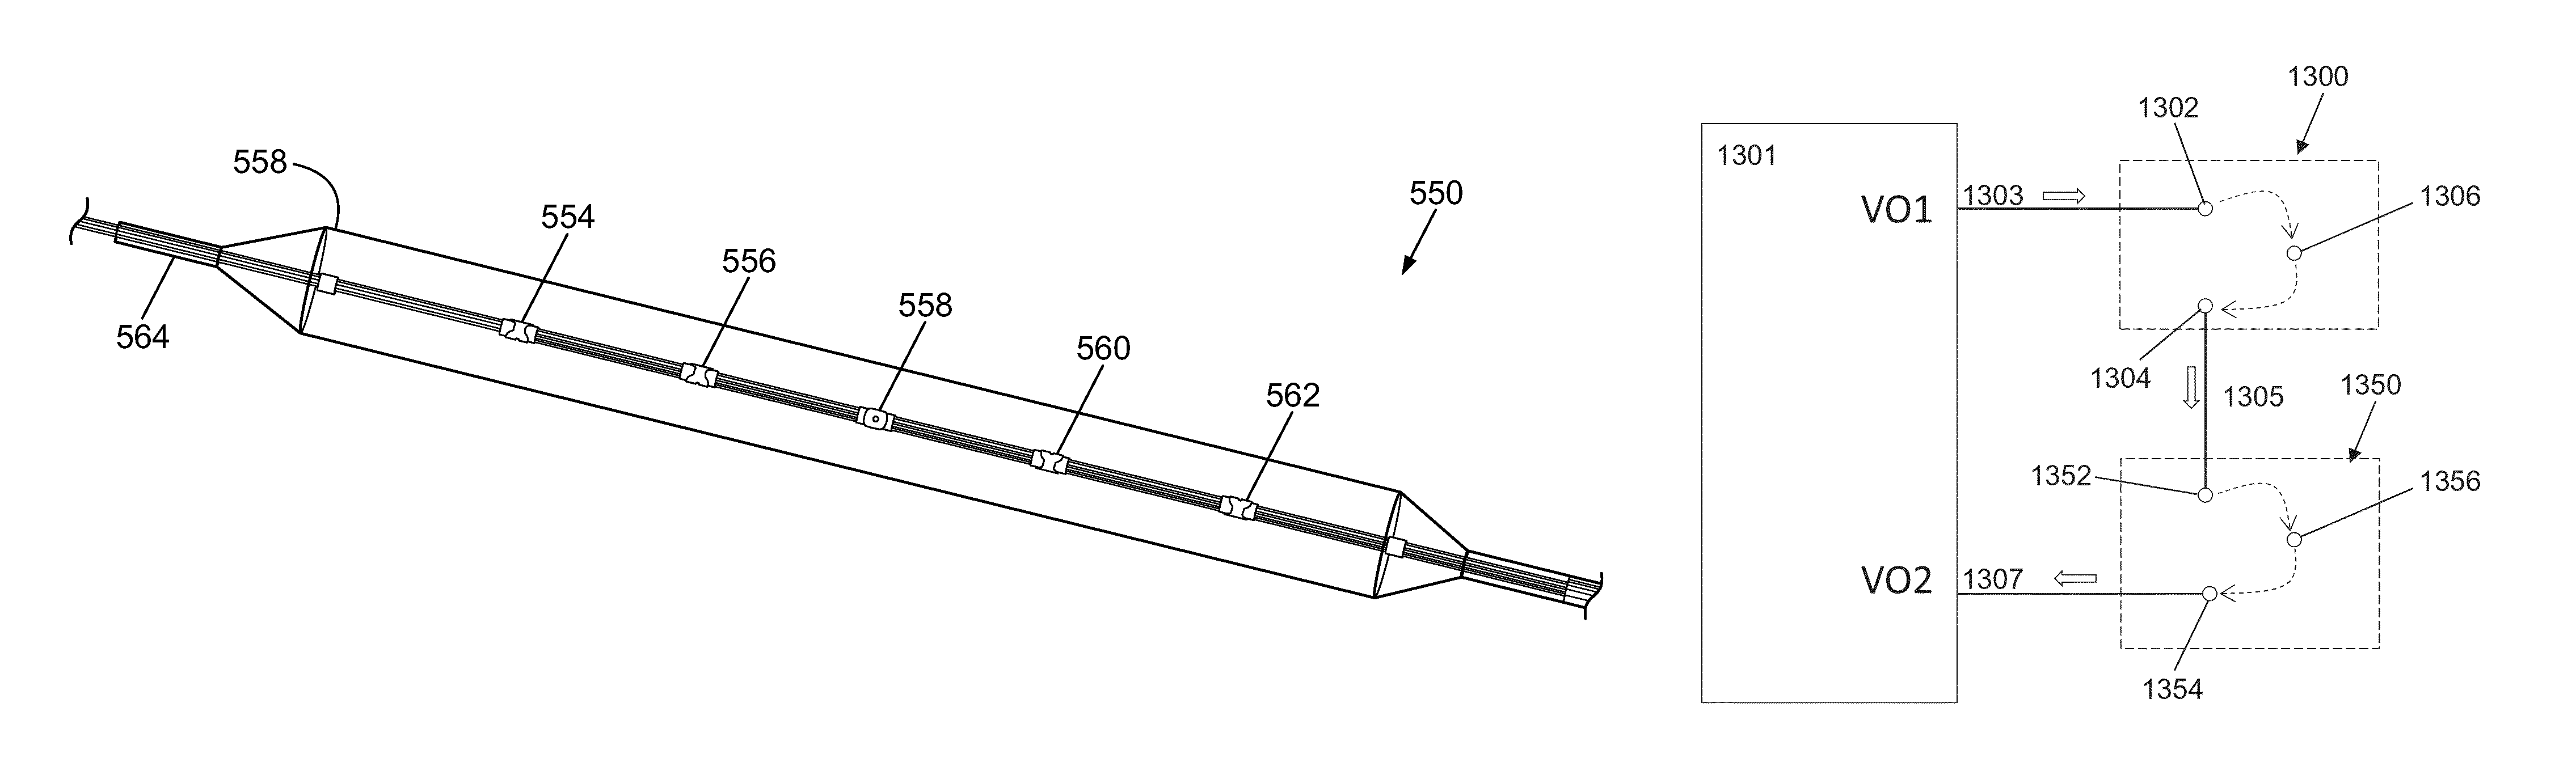 Low profile electrodes for an angioplasty shock wave catheter